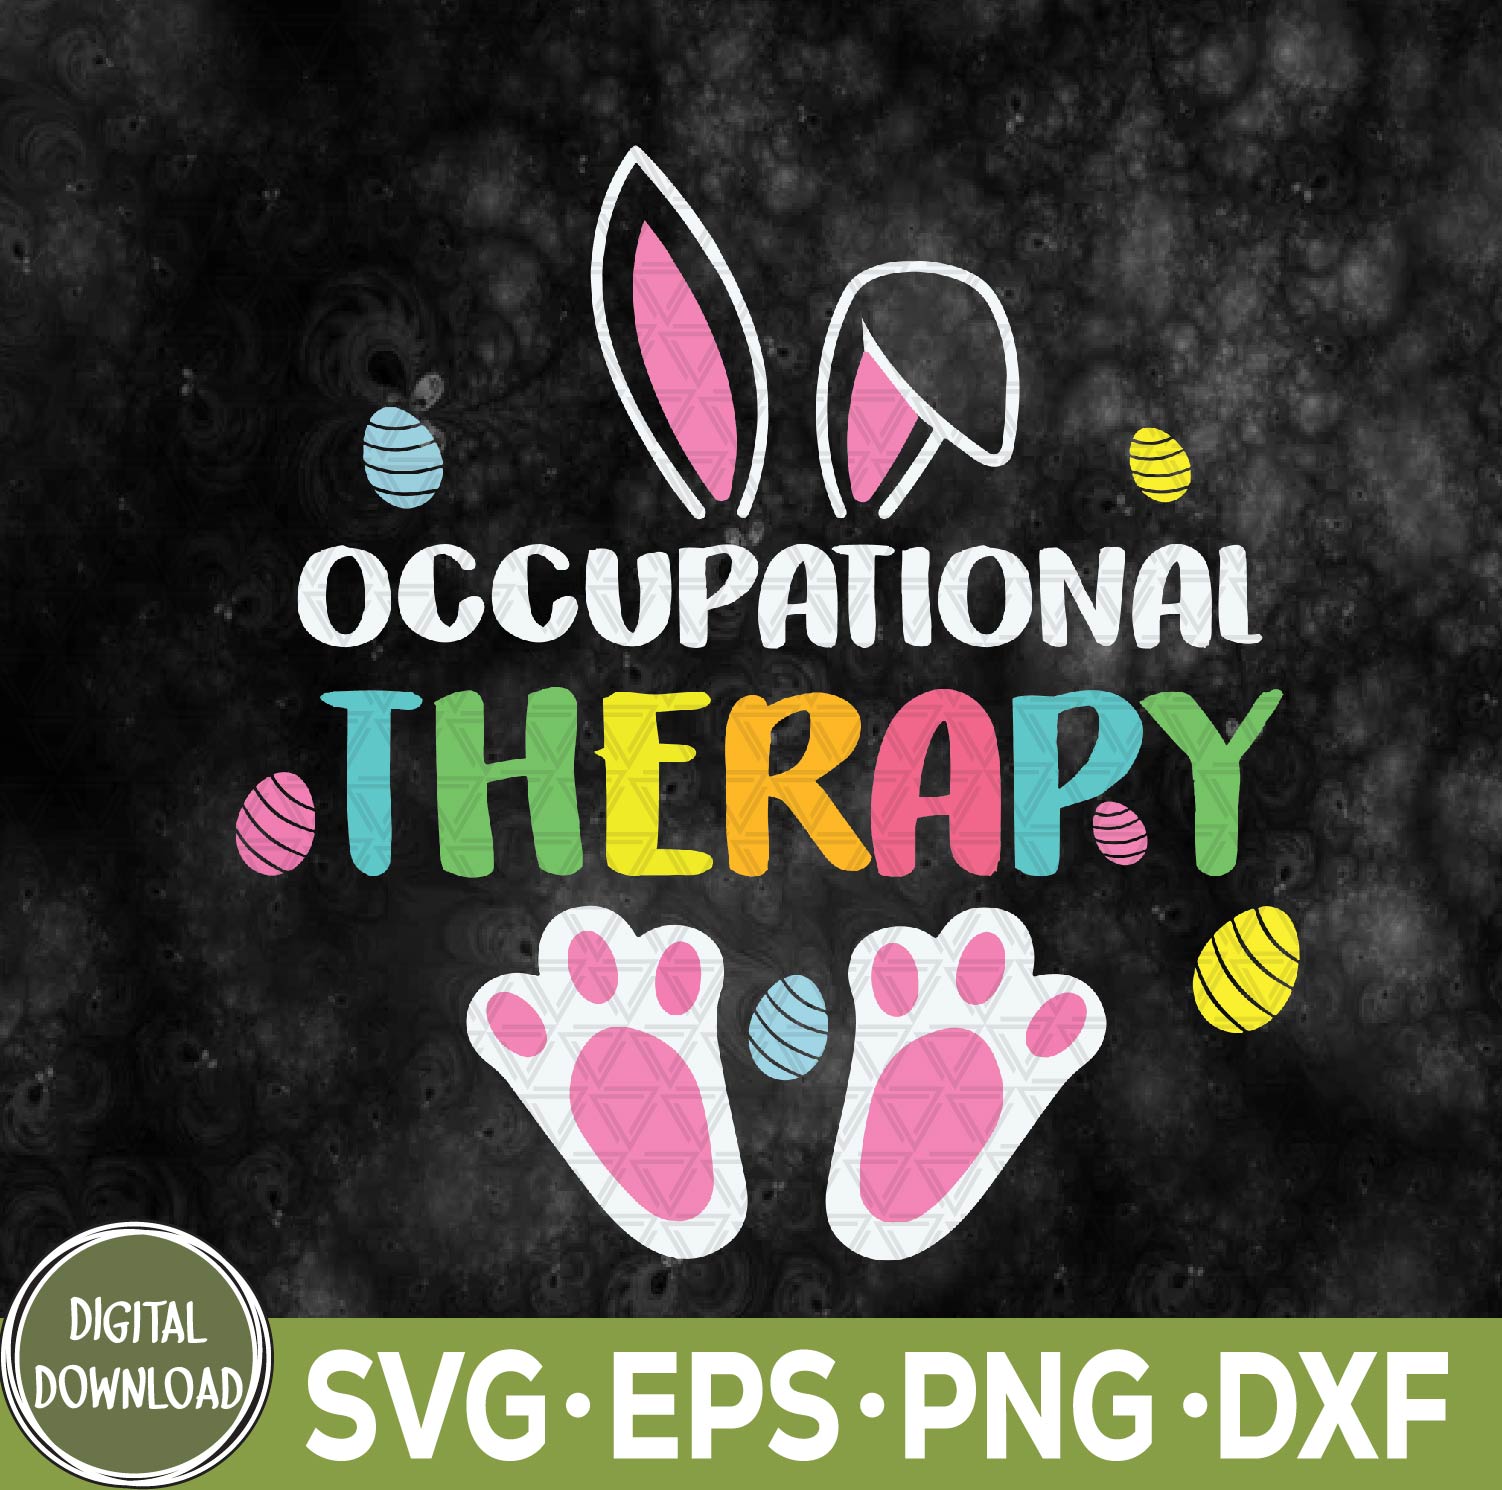 WTMNEW9file 09 48 Occupational Therapy Easter Bunny Ot Occupational Therapist Svg, Eps, Png, Dxf